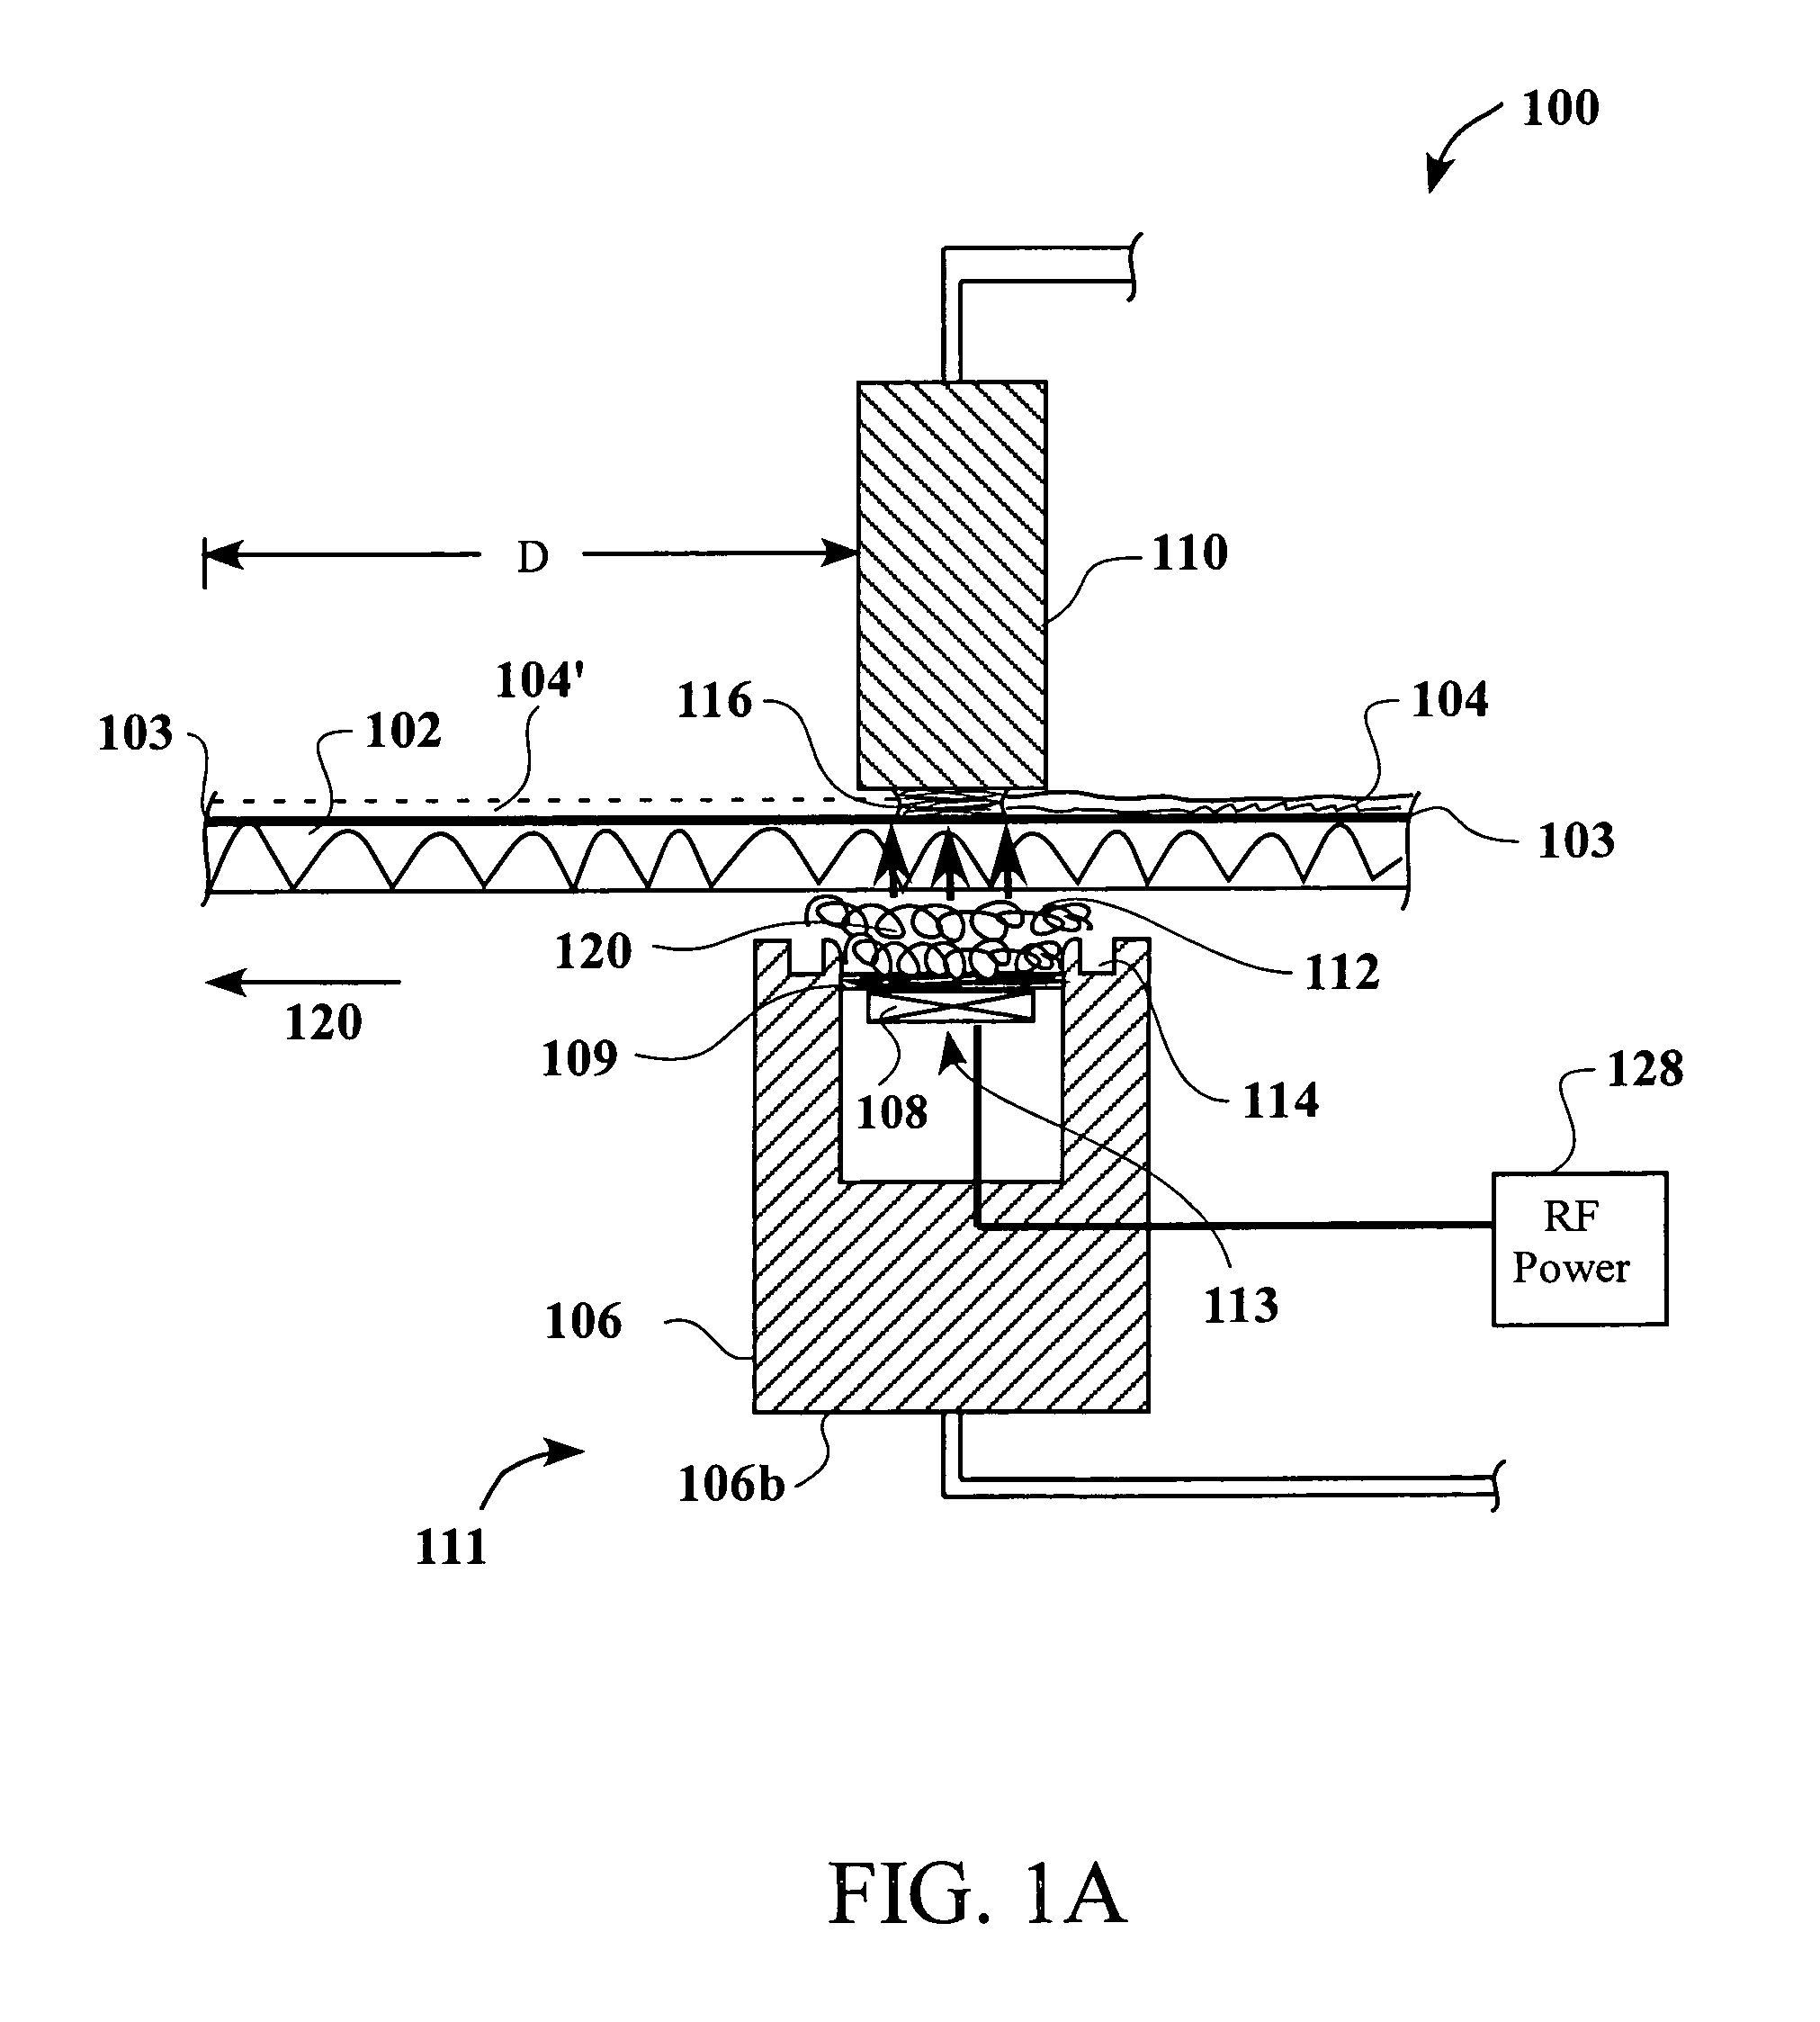 Substrate preparation using megasonic coupling fluid meniscus and methods, apparatus, and systems for implementing the same